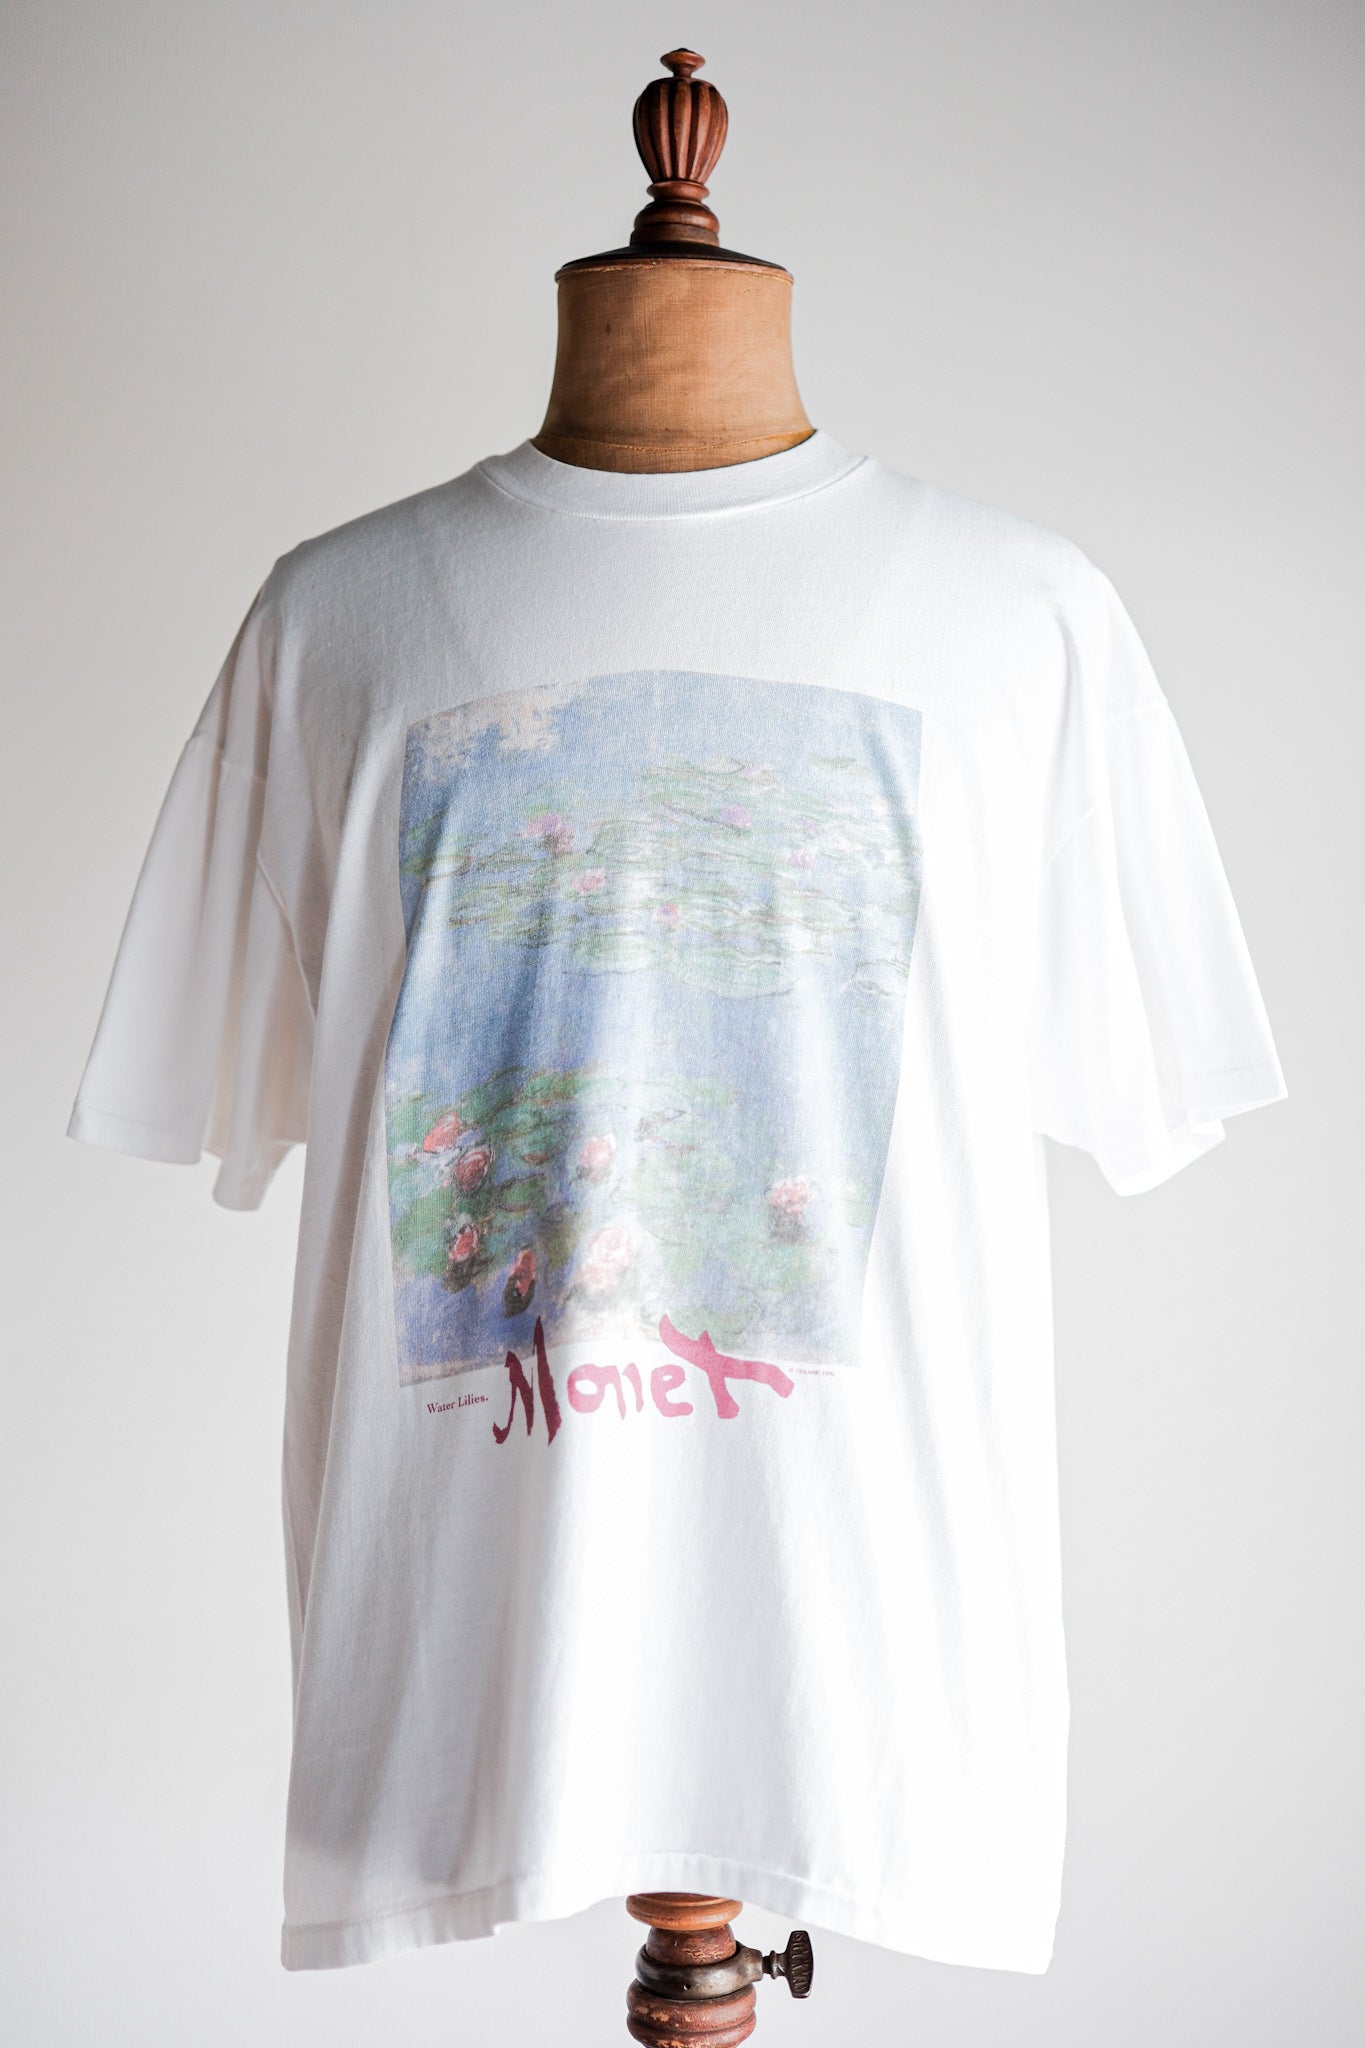 [~ 90's] Vintage Art Print T-shirt size.xl "Claude Monet" "Lys Water" "Made in U.S.A."